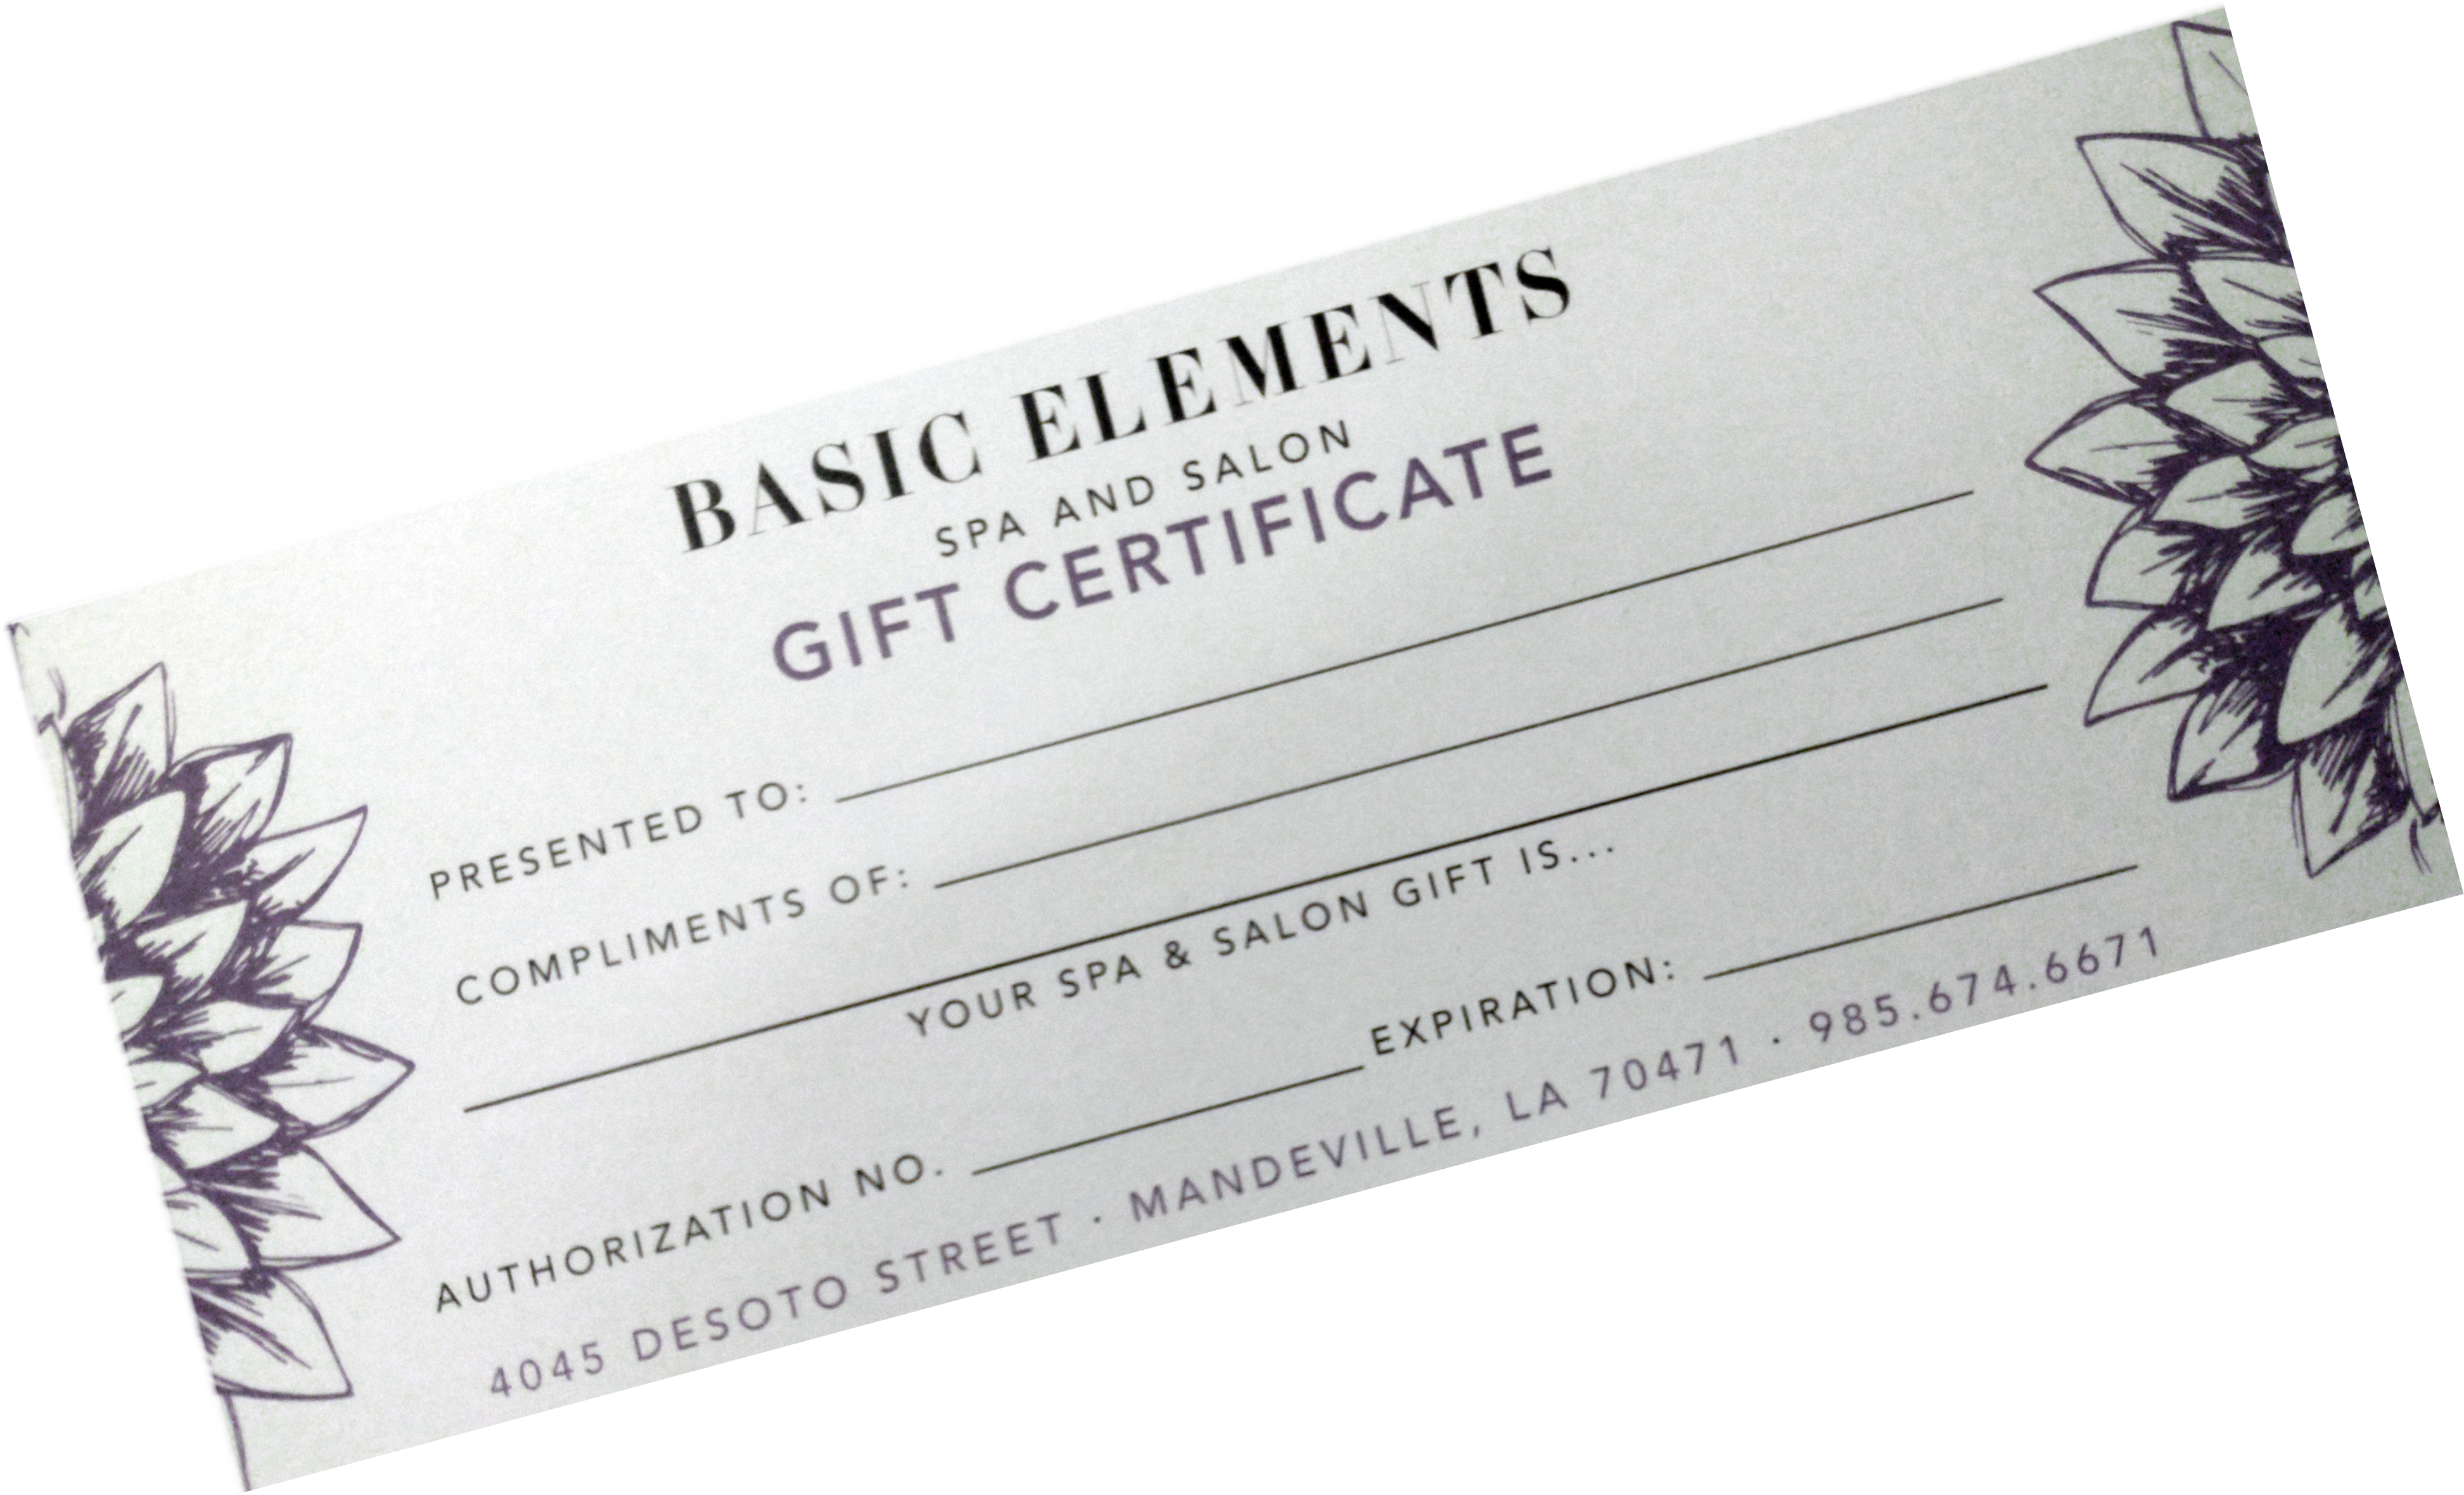 Basic Elements Gift Certificate